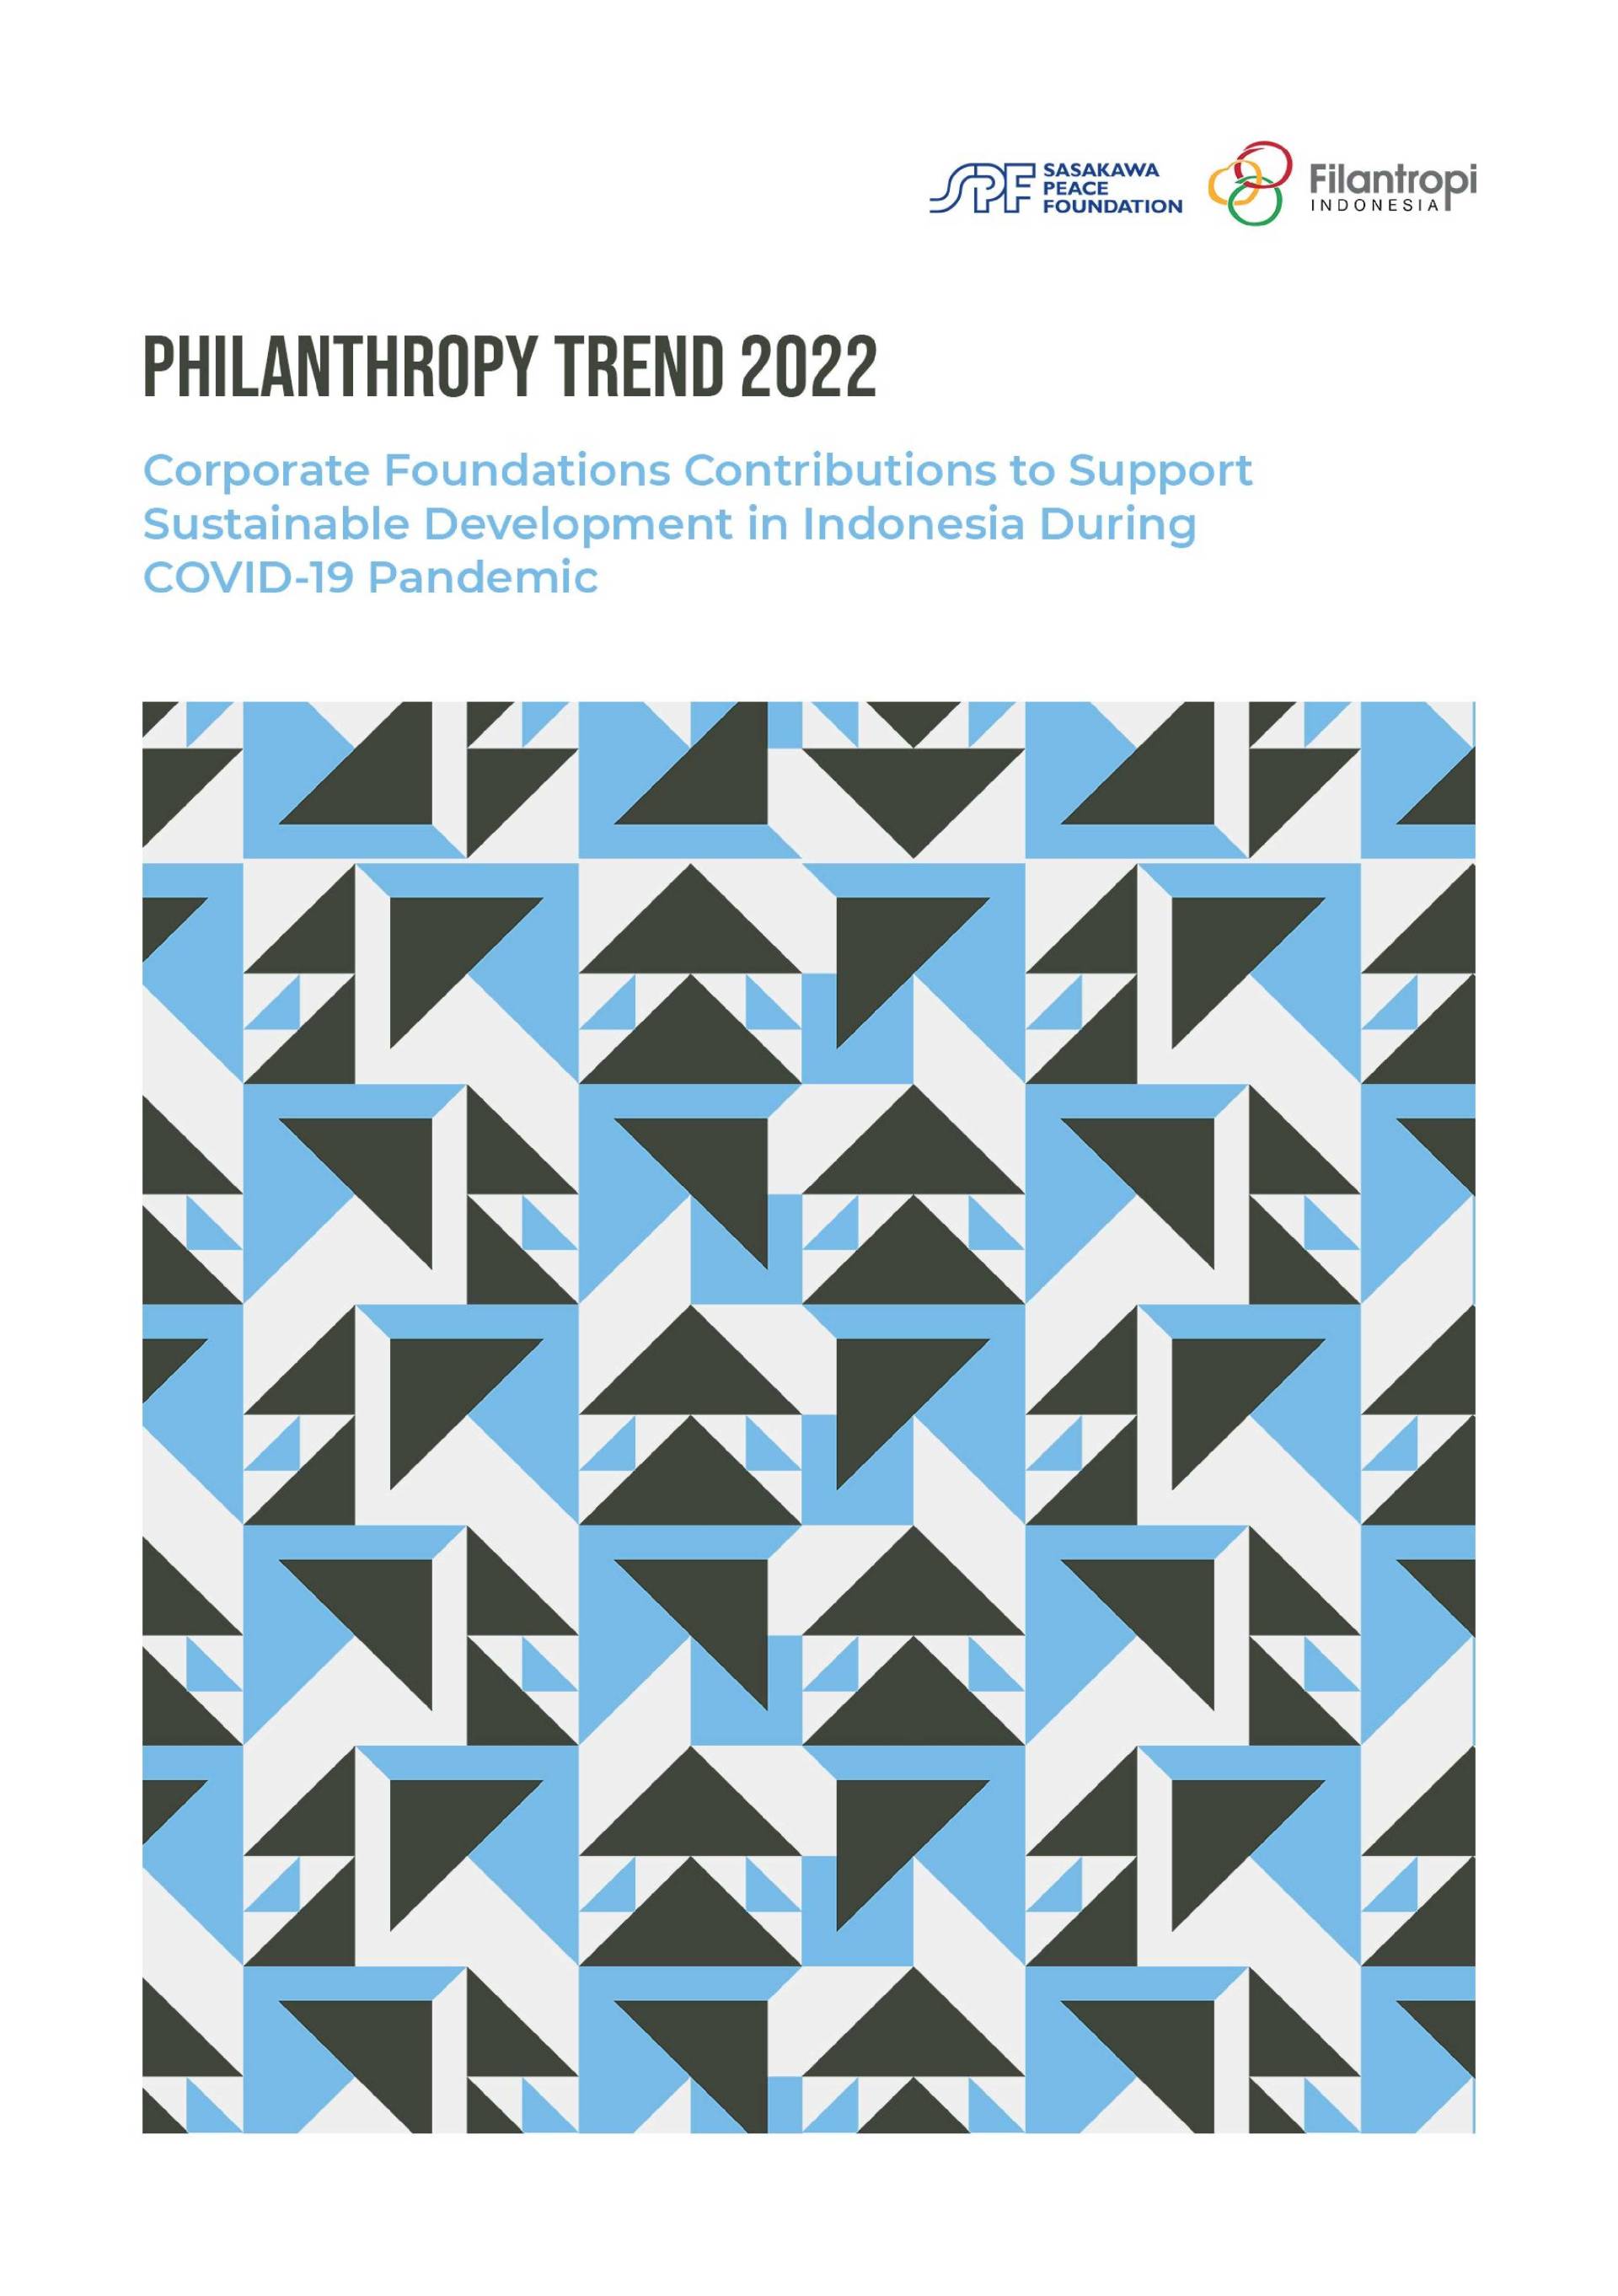 Philanthropy Trend 2022 - Report on the Growth of Philanthropy Sector in Indonesia（in partnership with Filantropi Indonesia）